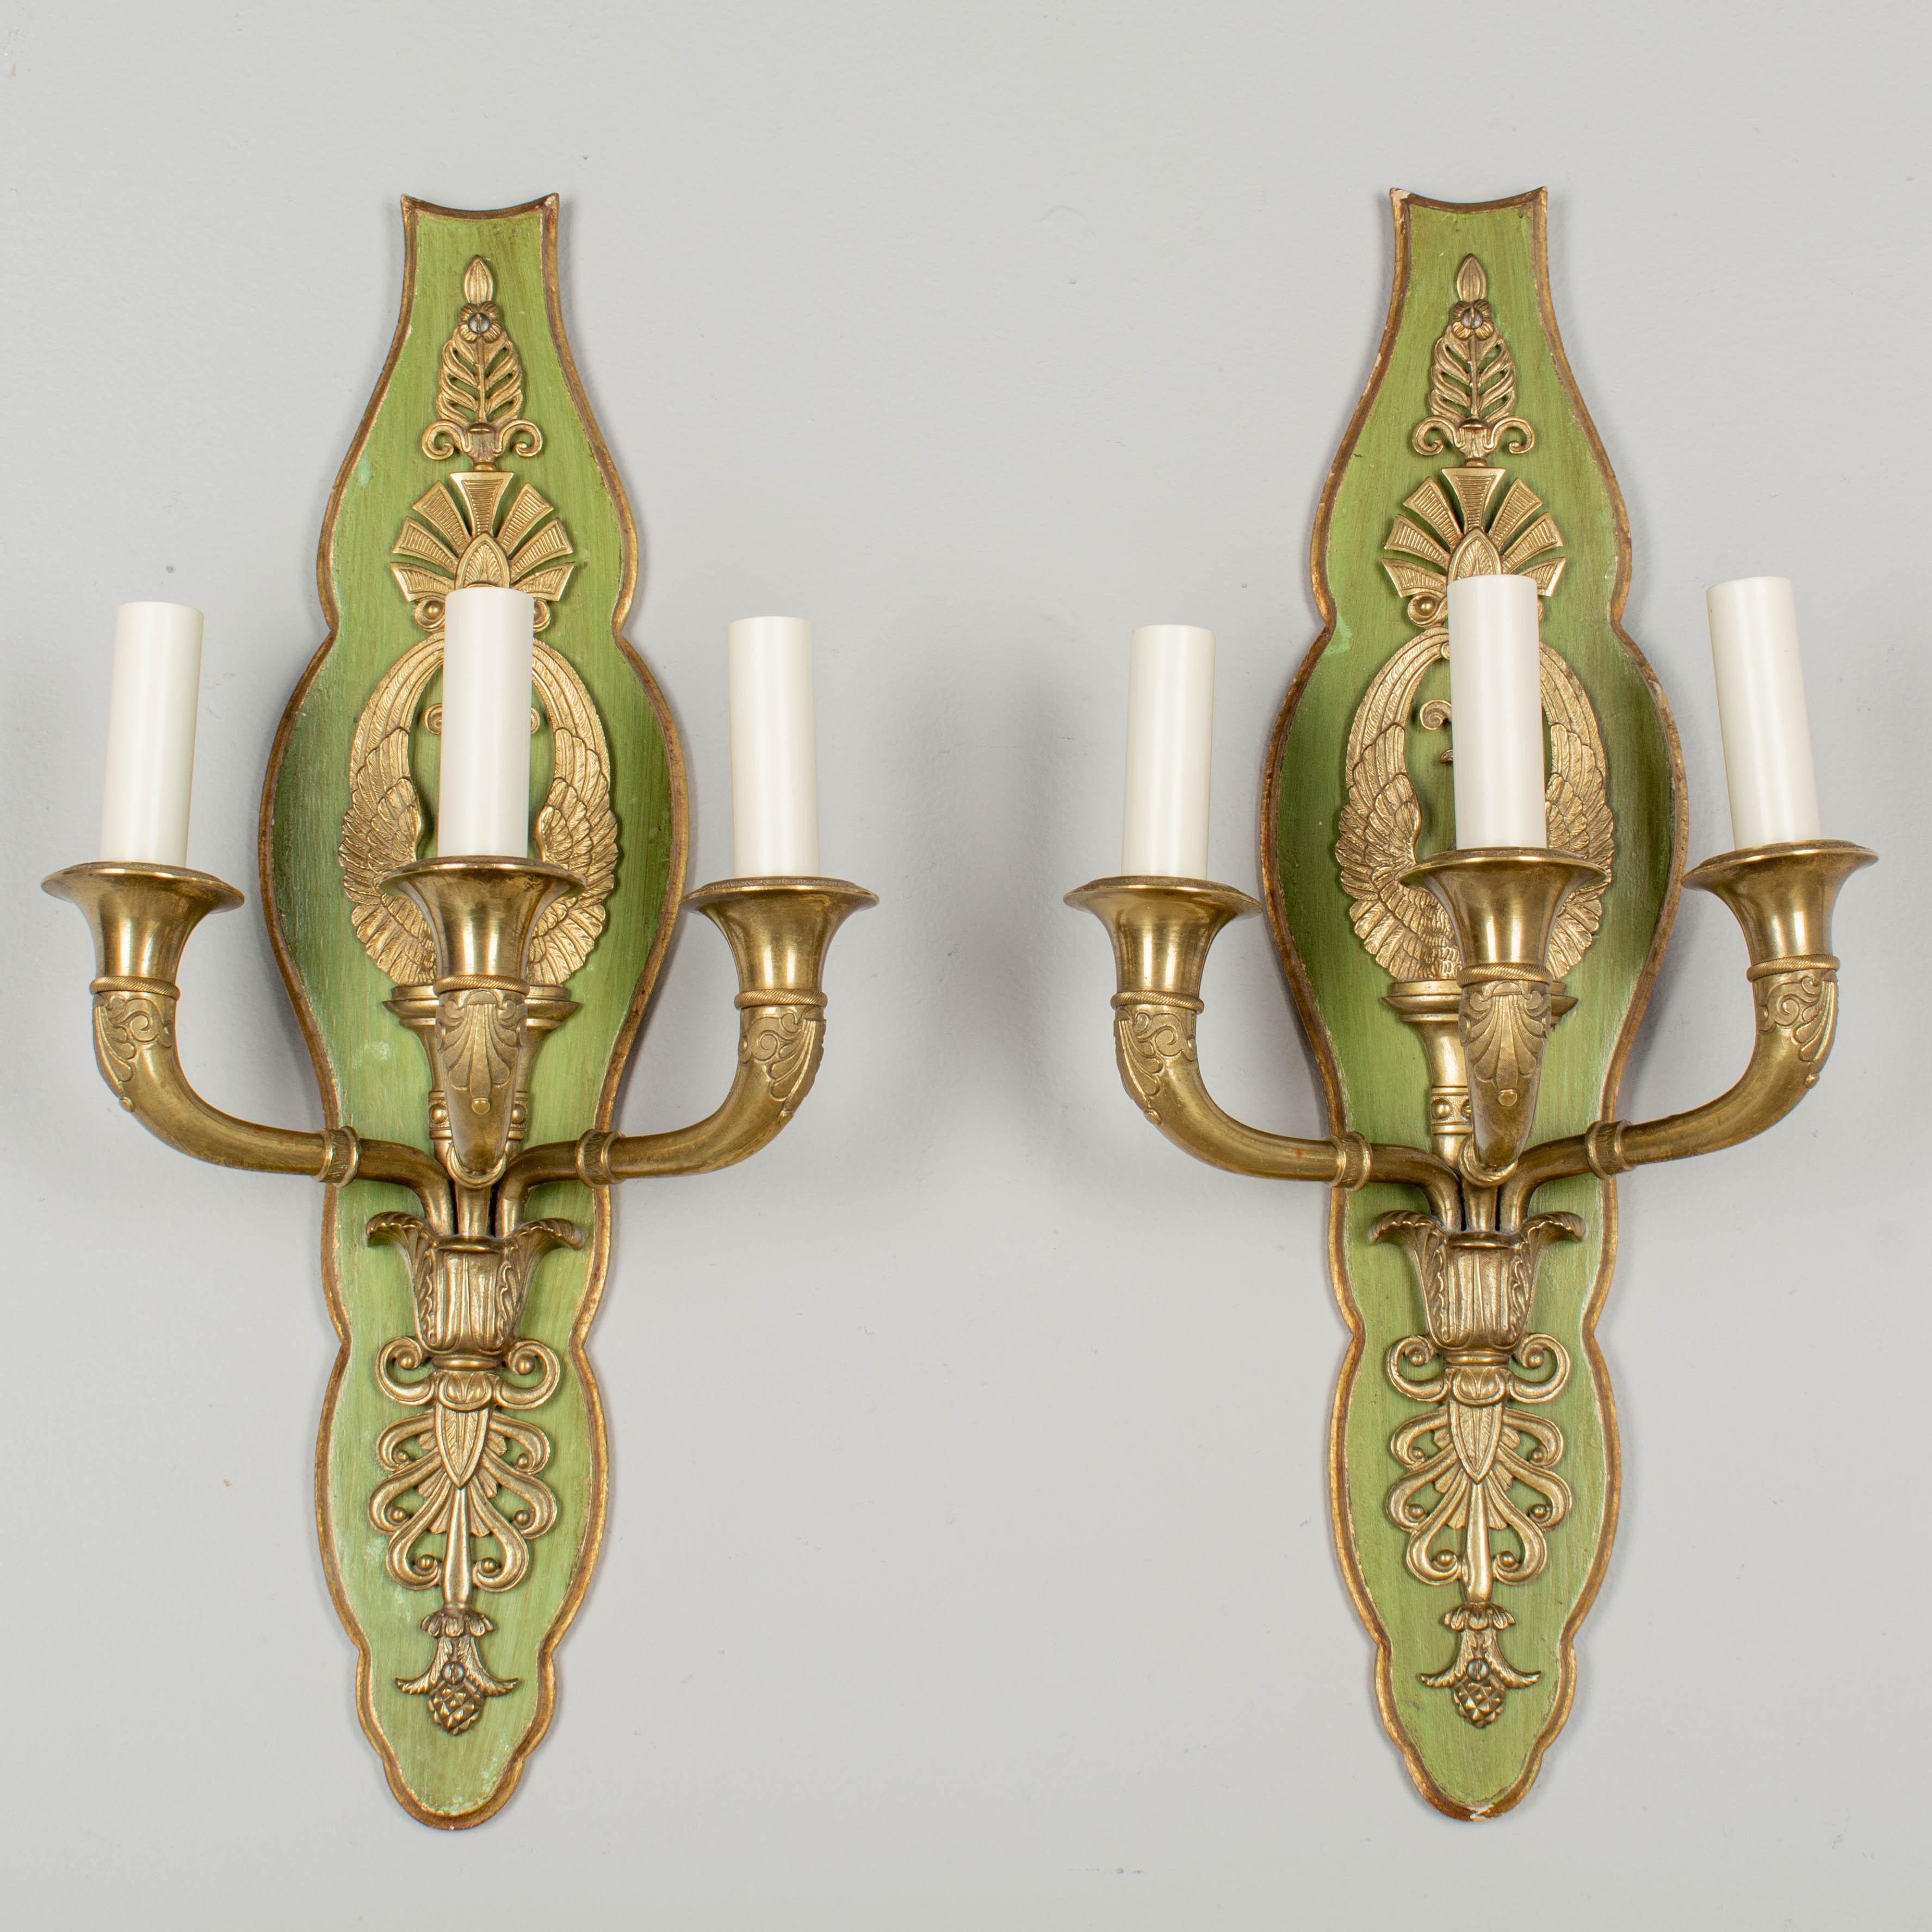 A pair of French Empire style bronze three light sconces. Fine cast details including a swan with three dimensional neck and outstretched wings. Beautiful old patina. Wood backplate with green painted finish and gilt trim. In working order with new